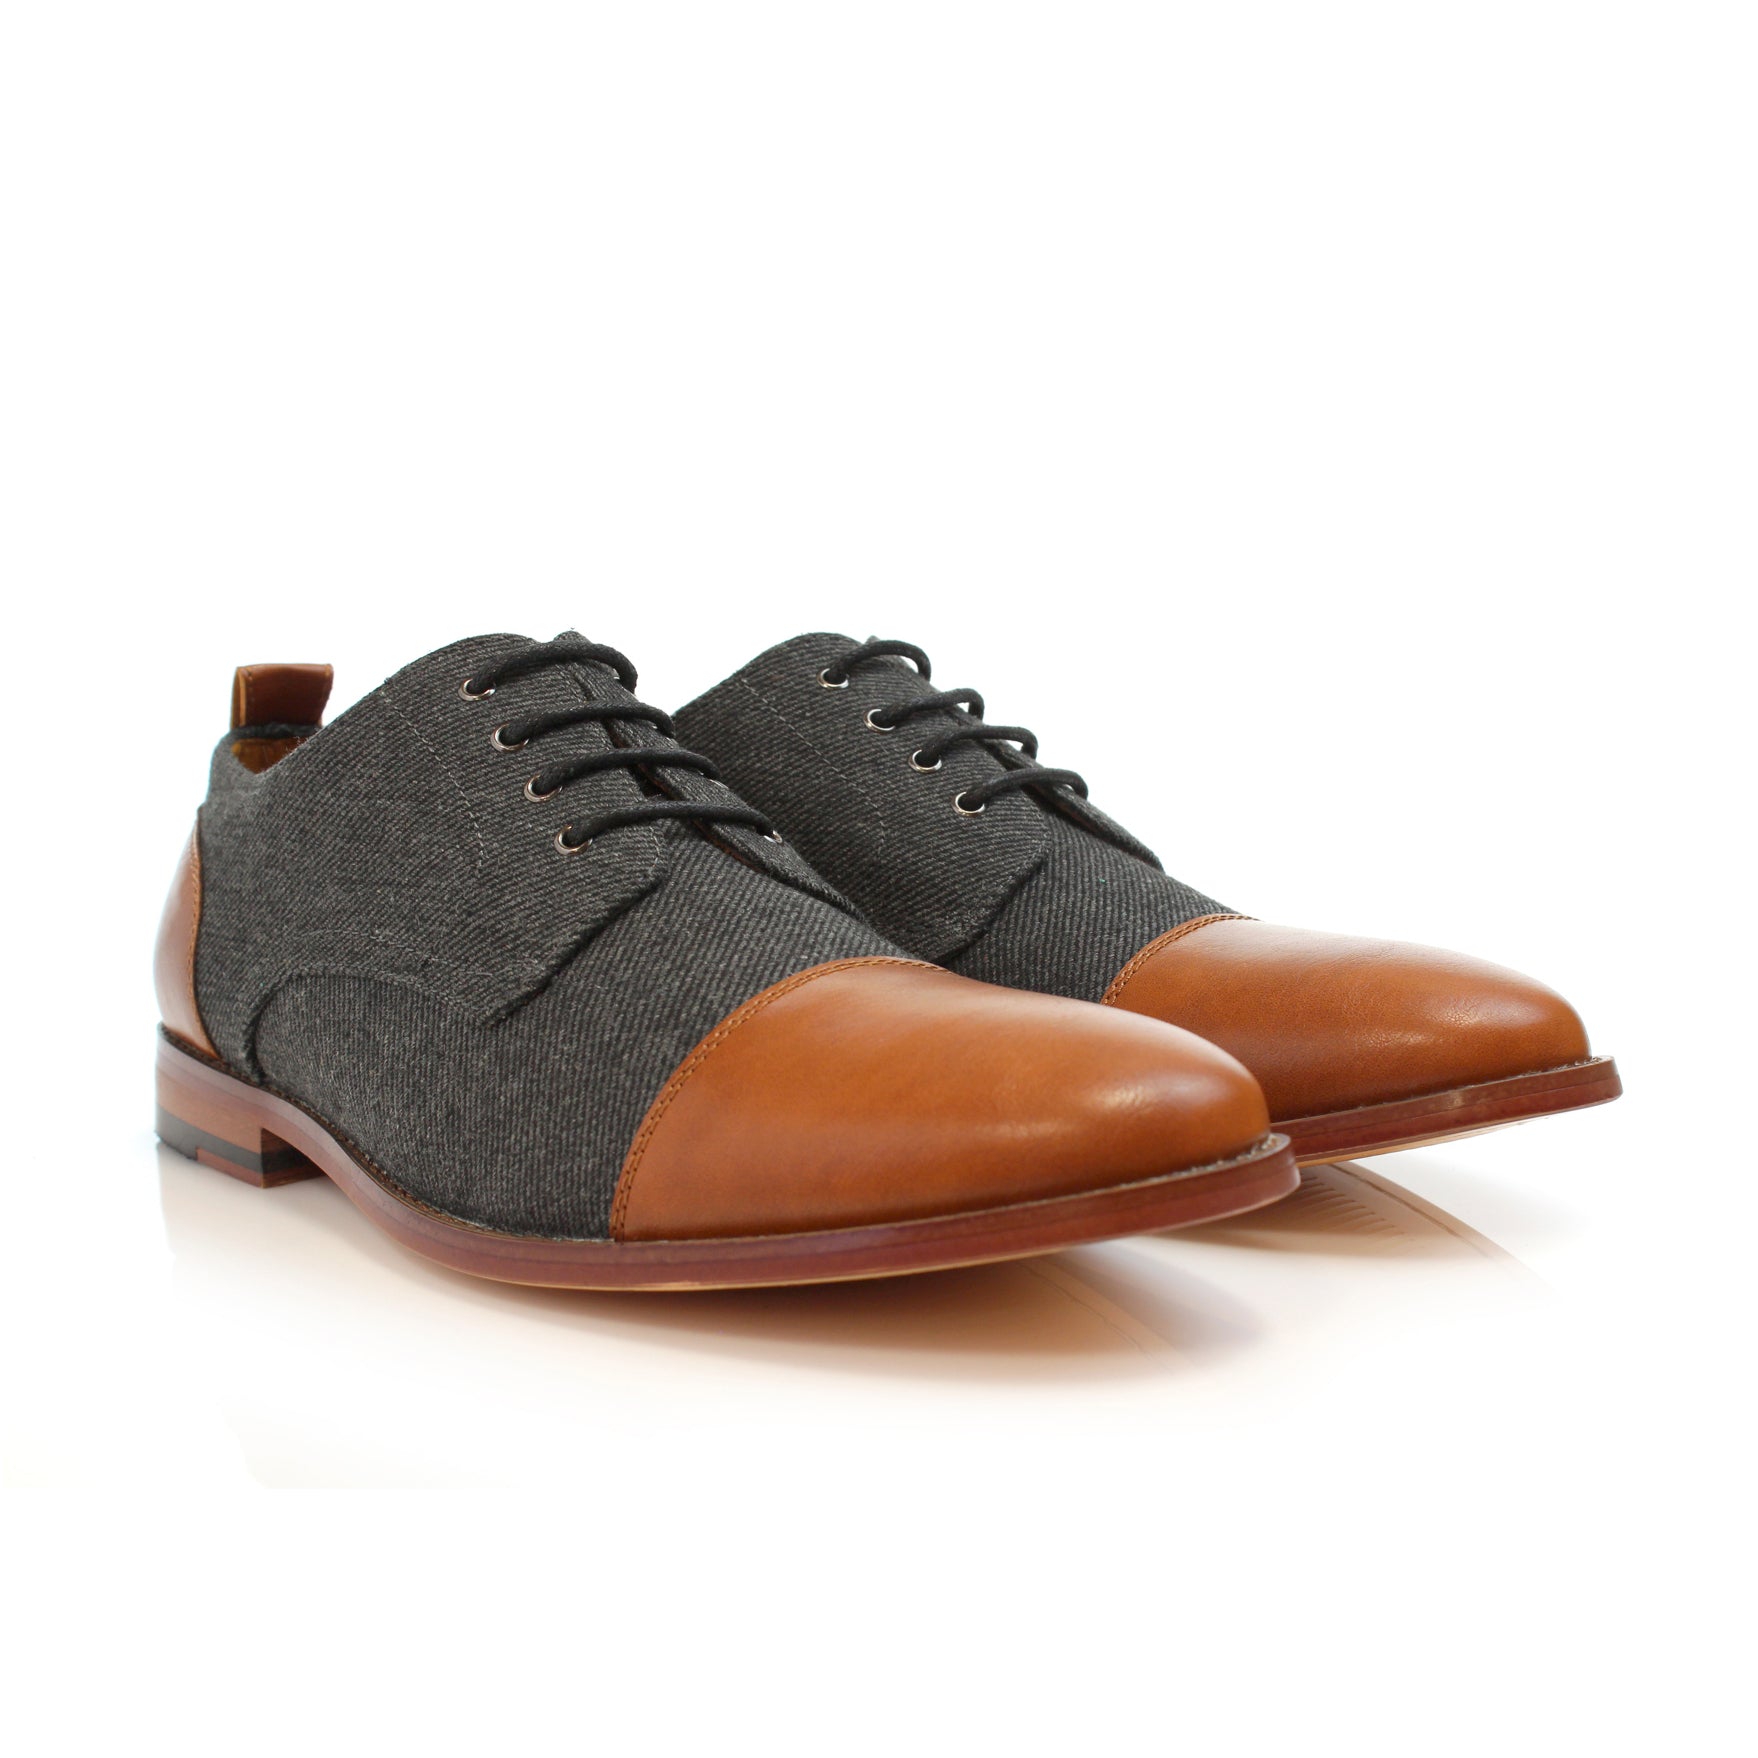 Duo-textured Woolen Derby Dress Shoes | Clifford by Polar Fox | Conal Footwear | Paired Angle View